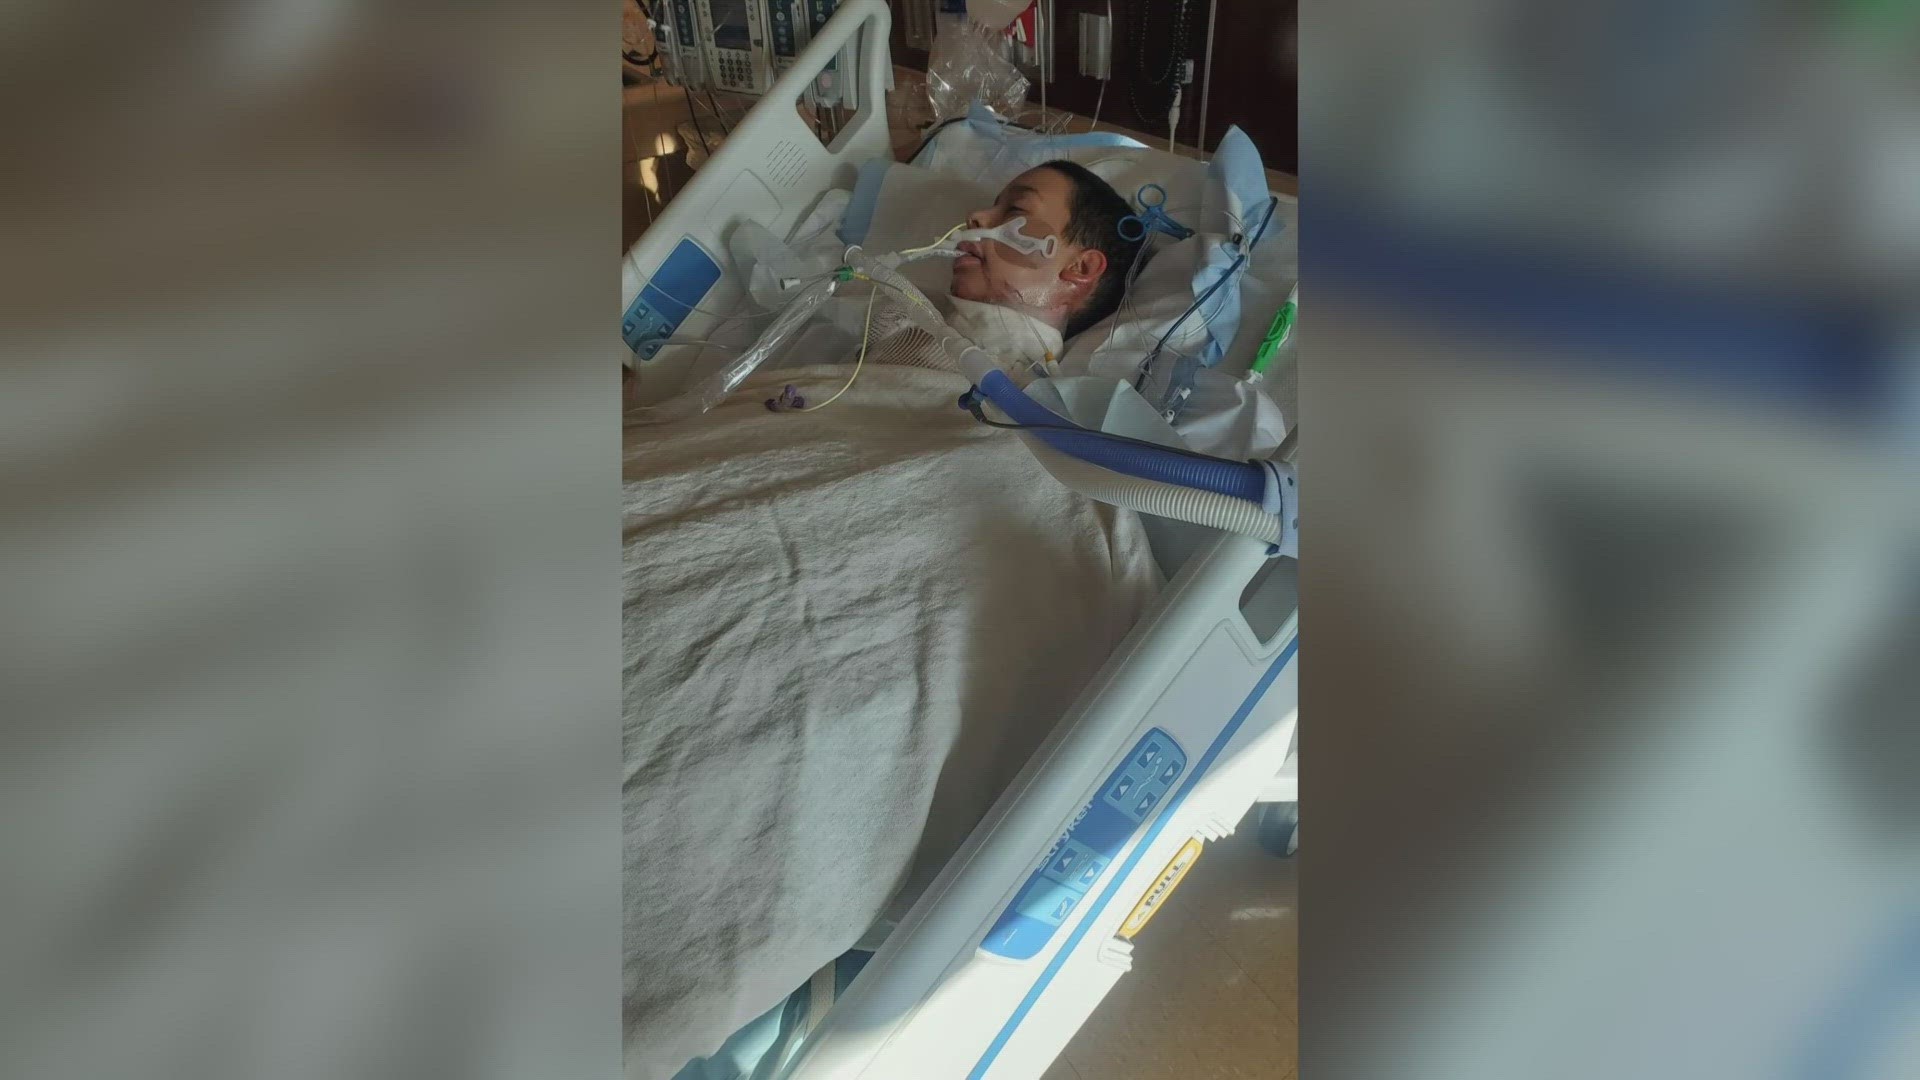 A 12-year-old boy in Tucson is now in the hospital after attempting to do a TikTok challenge that involves kids setting rubbing alcohol on fire, his family says.